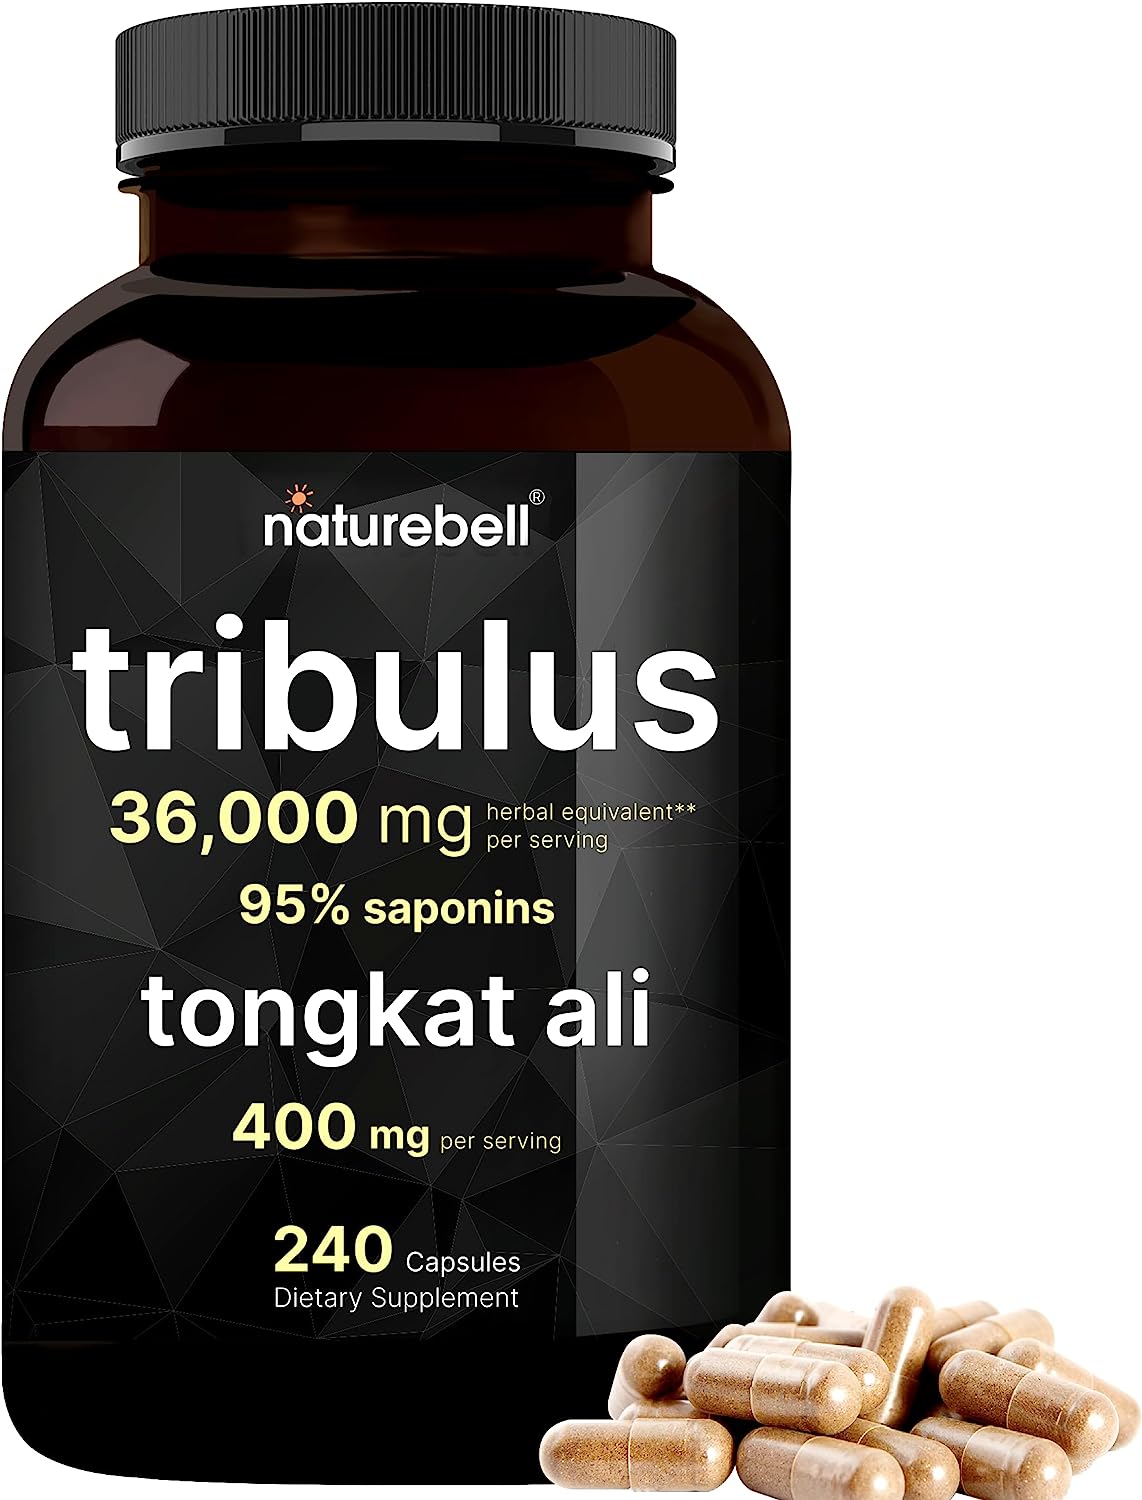 Tribulus Terrestris 36,000mg with Tongkat Ali 400mg Per Serving for Men, 240 Capsules ? 95% Steroidal Saponins & Eurycoma Longifolia, Plant Source, Extra Highly Concentrated, Non-GMO, No Gluten